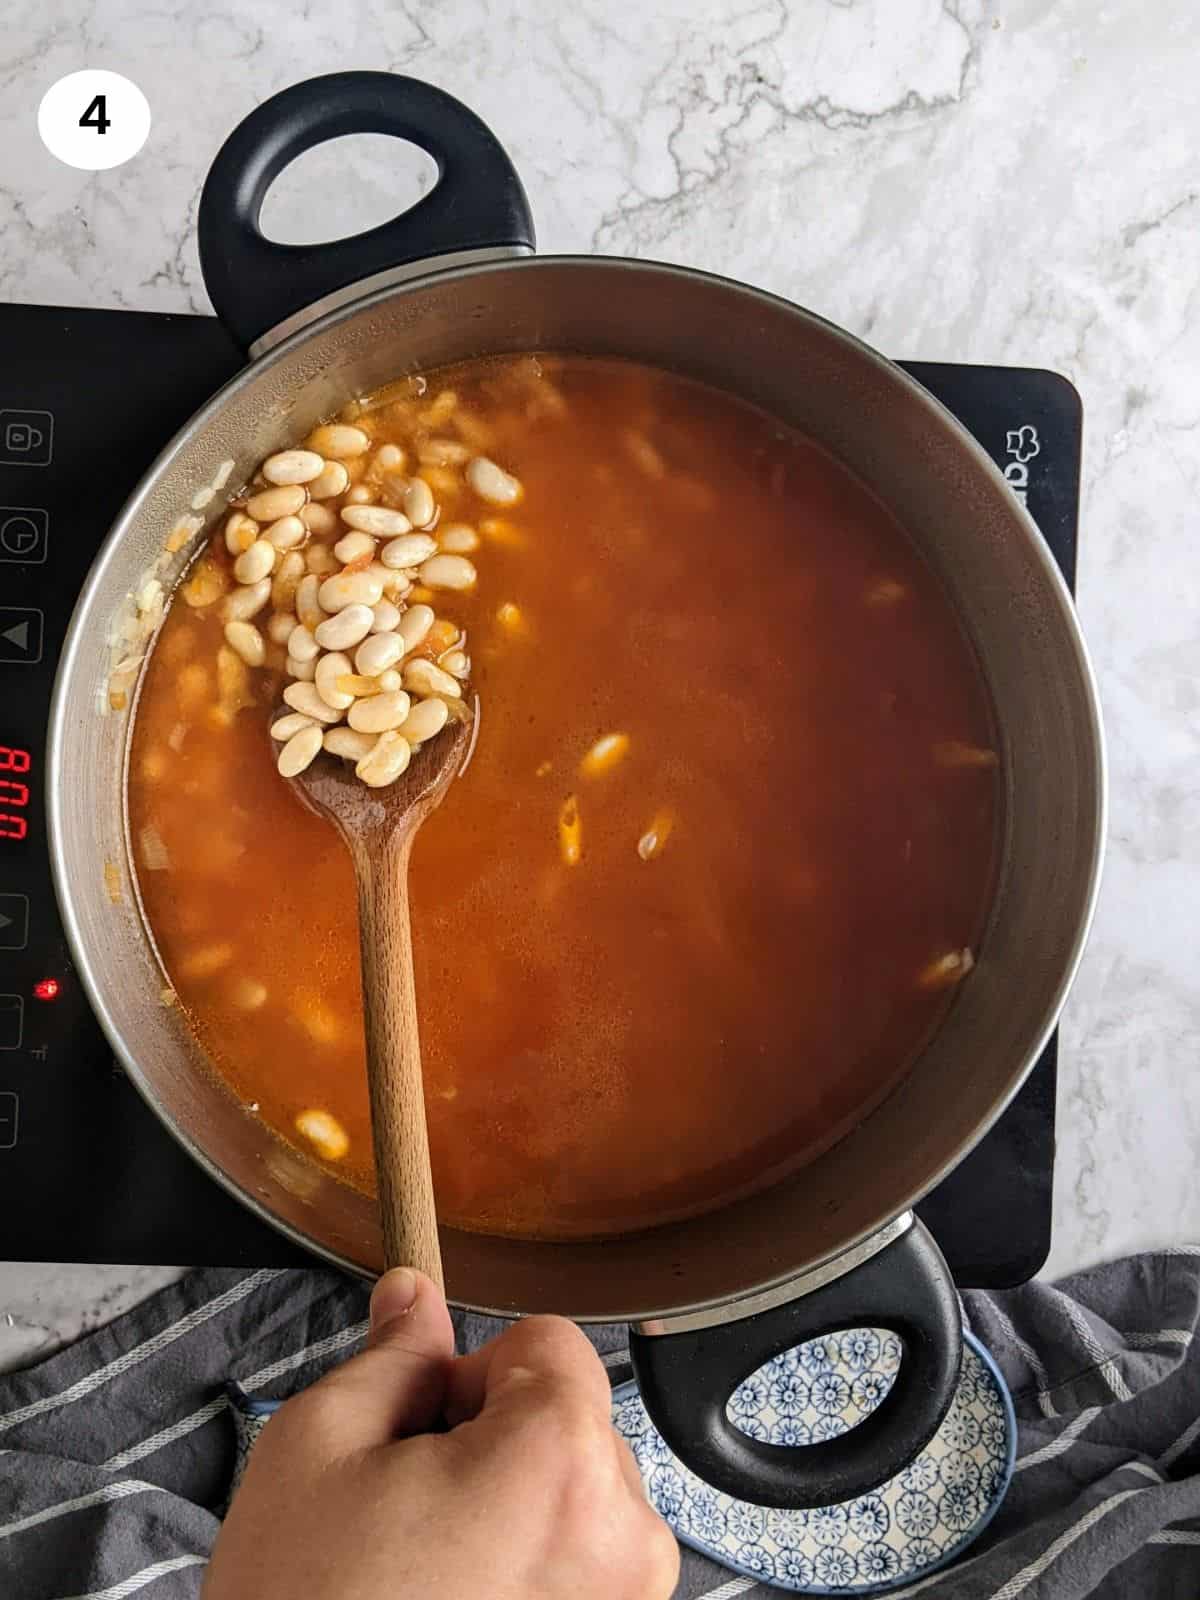 Added white beans and water to the pot.